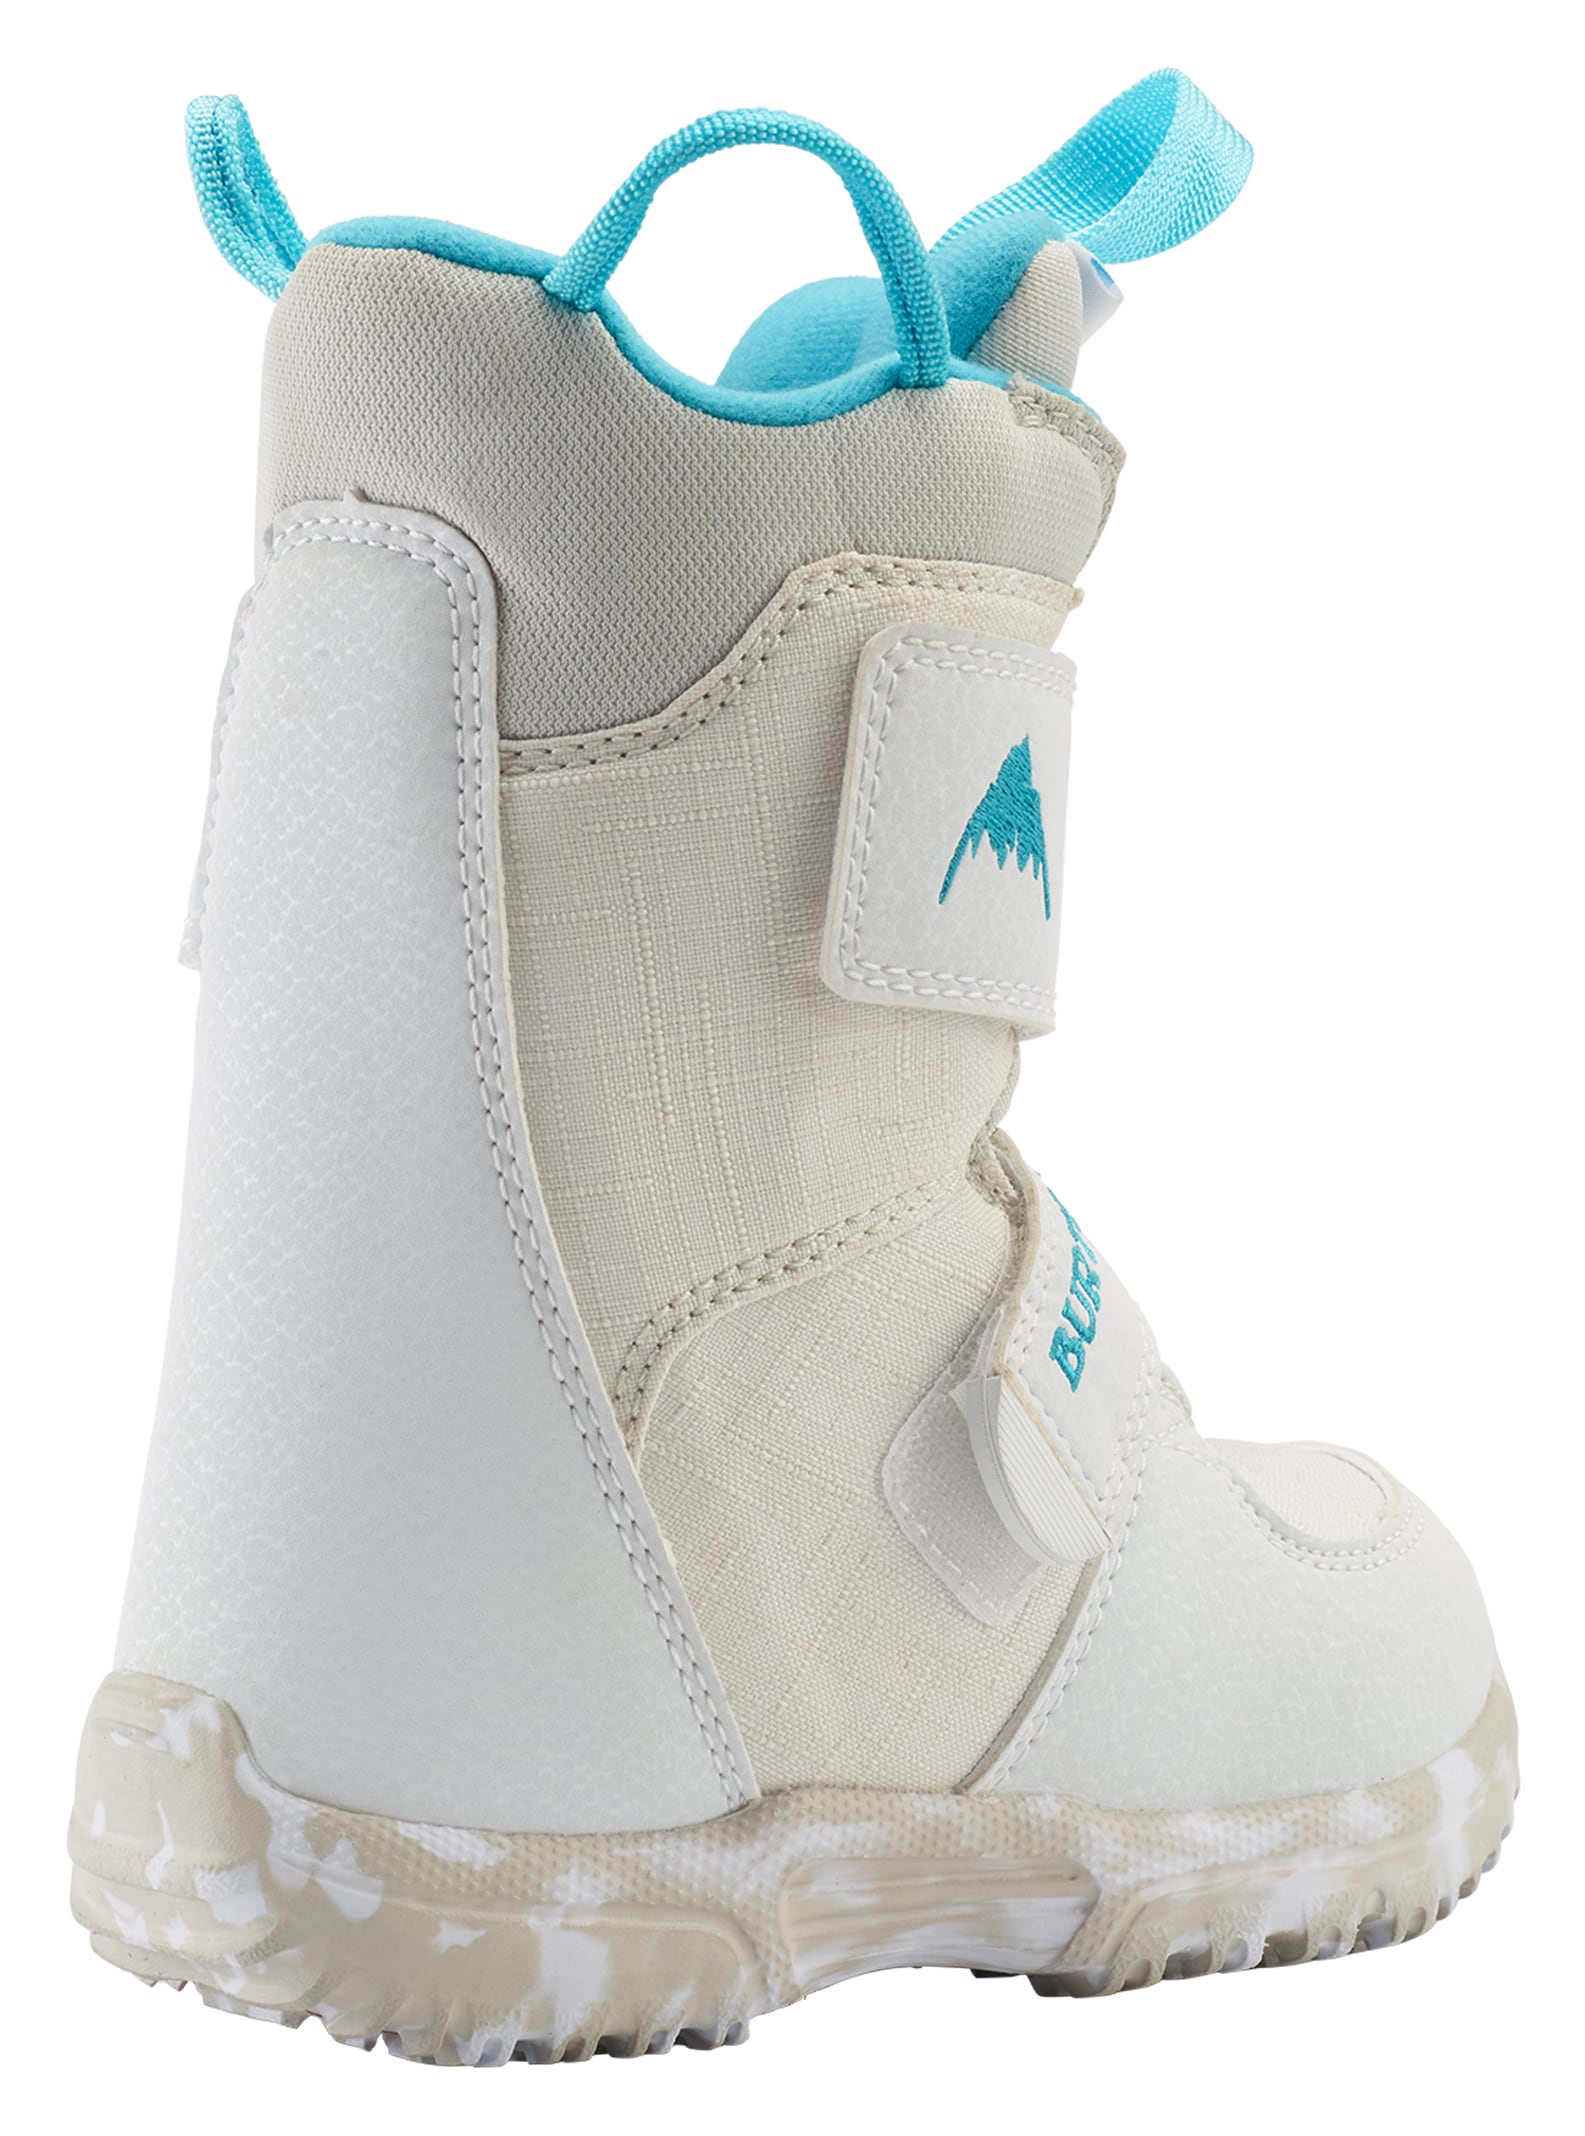 Toddlers' Mini Grom Snowboard Boots, White